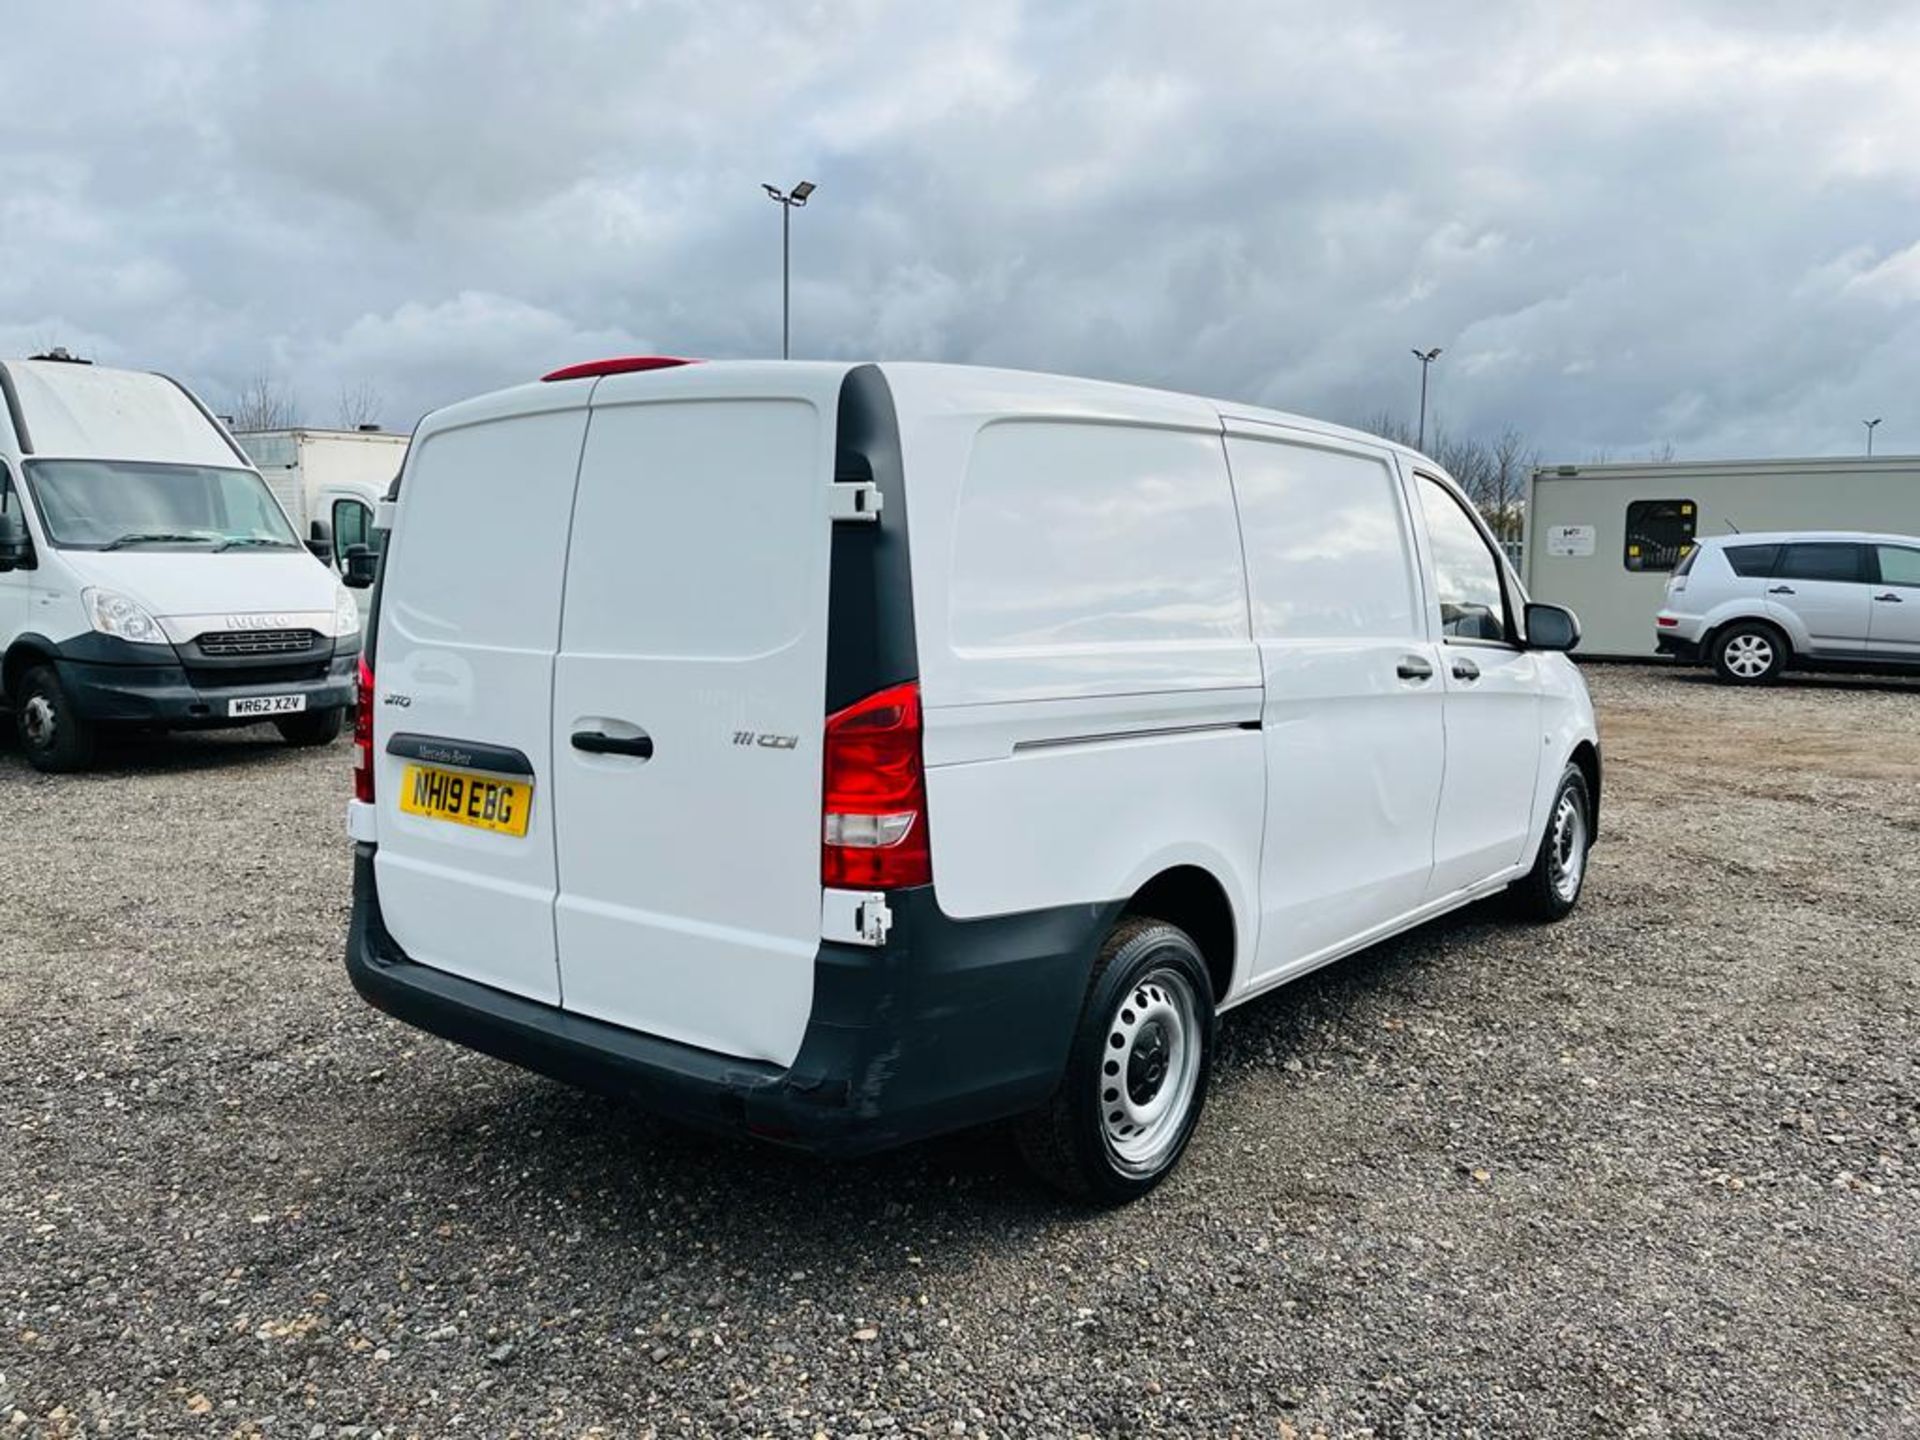 Mercedes Benz Vito 1.6 111 CDI FWD 2019 '19 Reg' - ULEZ Compliant - Only 85,733 Miles - Image 10 of 24